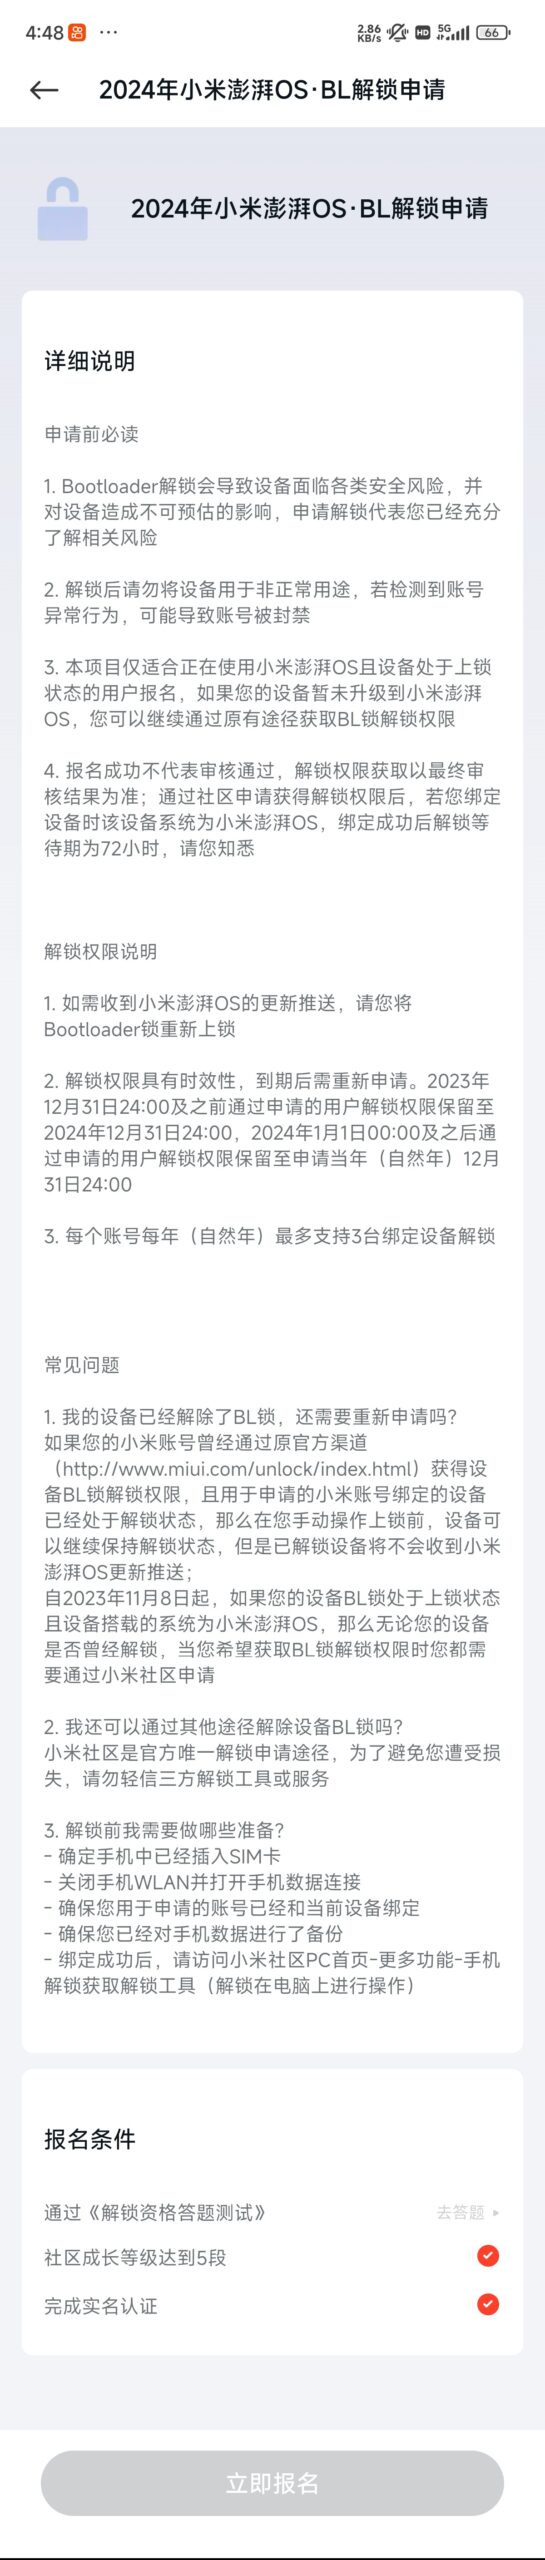 Xiaomi Revamped Bootloader Policy for HyperOS